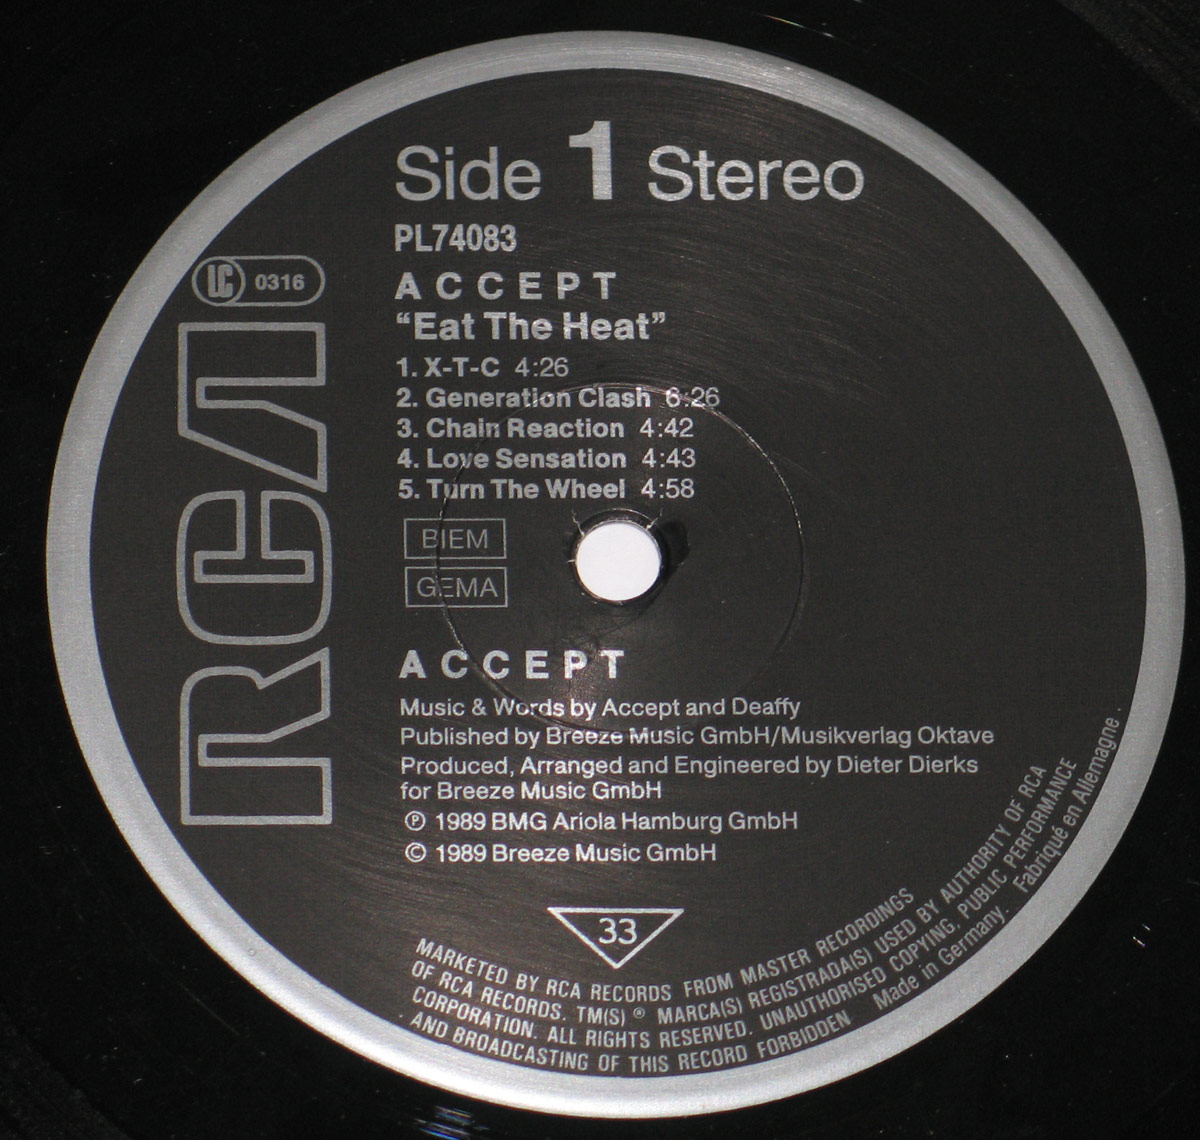 Close up of the Black and Grey "RCA" record's label with catalognr PL74083